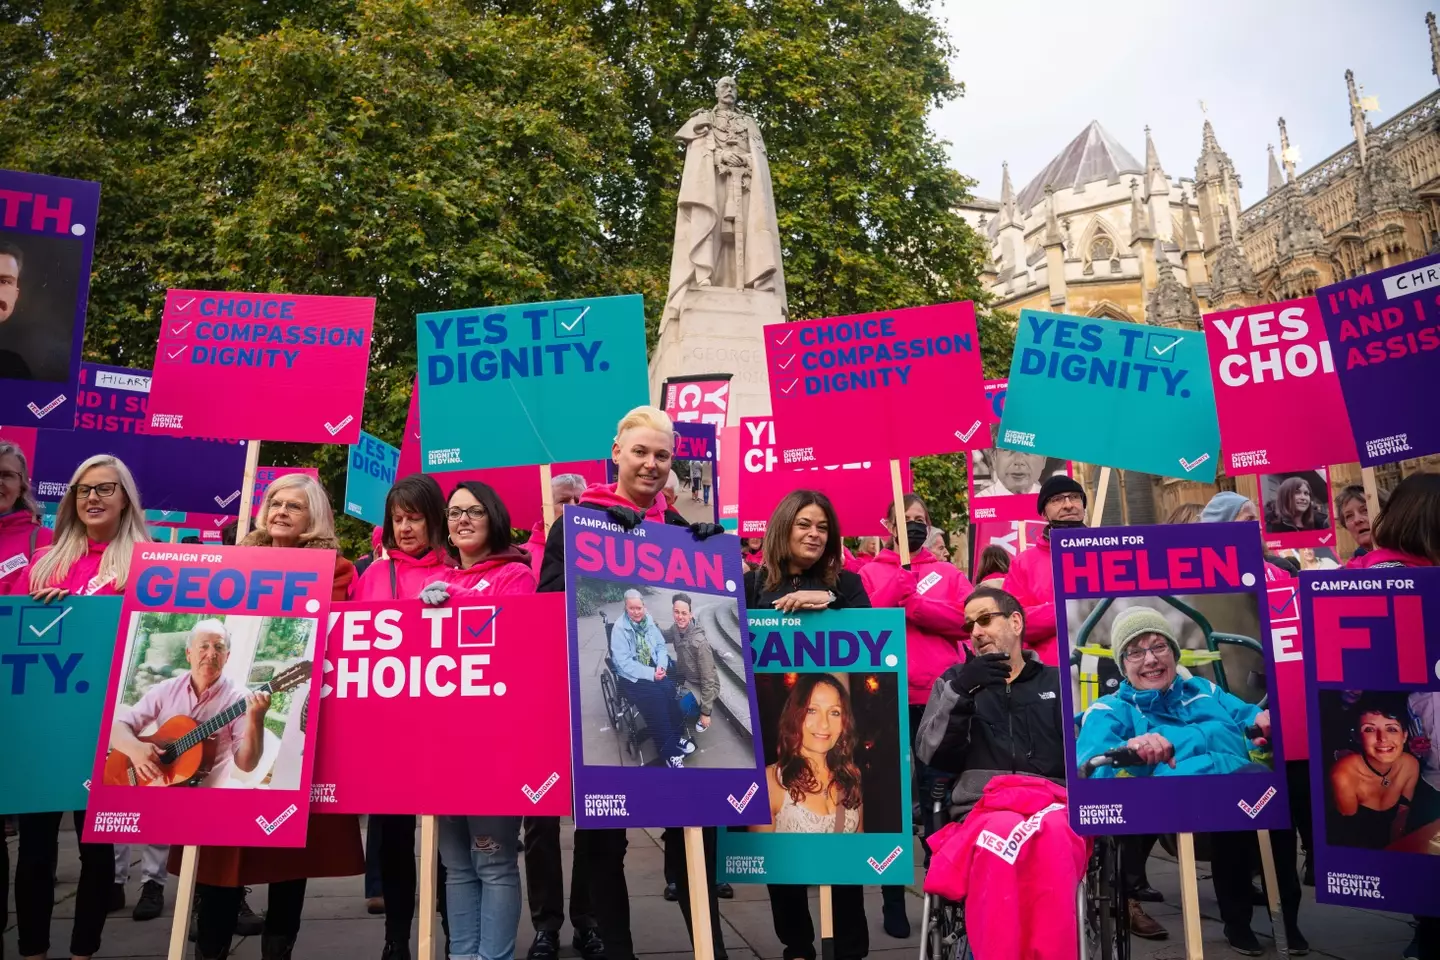 A protest supporting changes to the UK's assisted dying laws earlier this year.